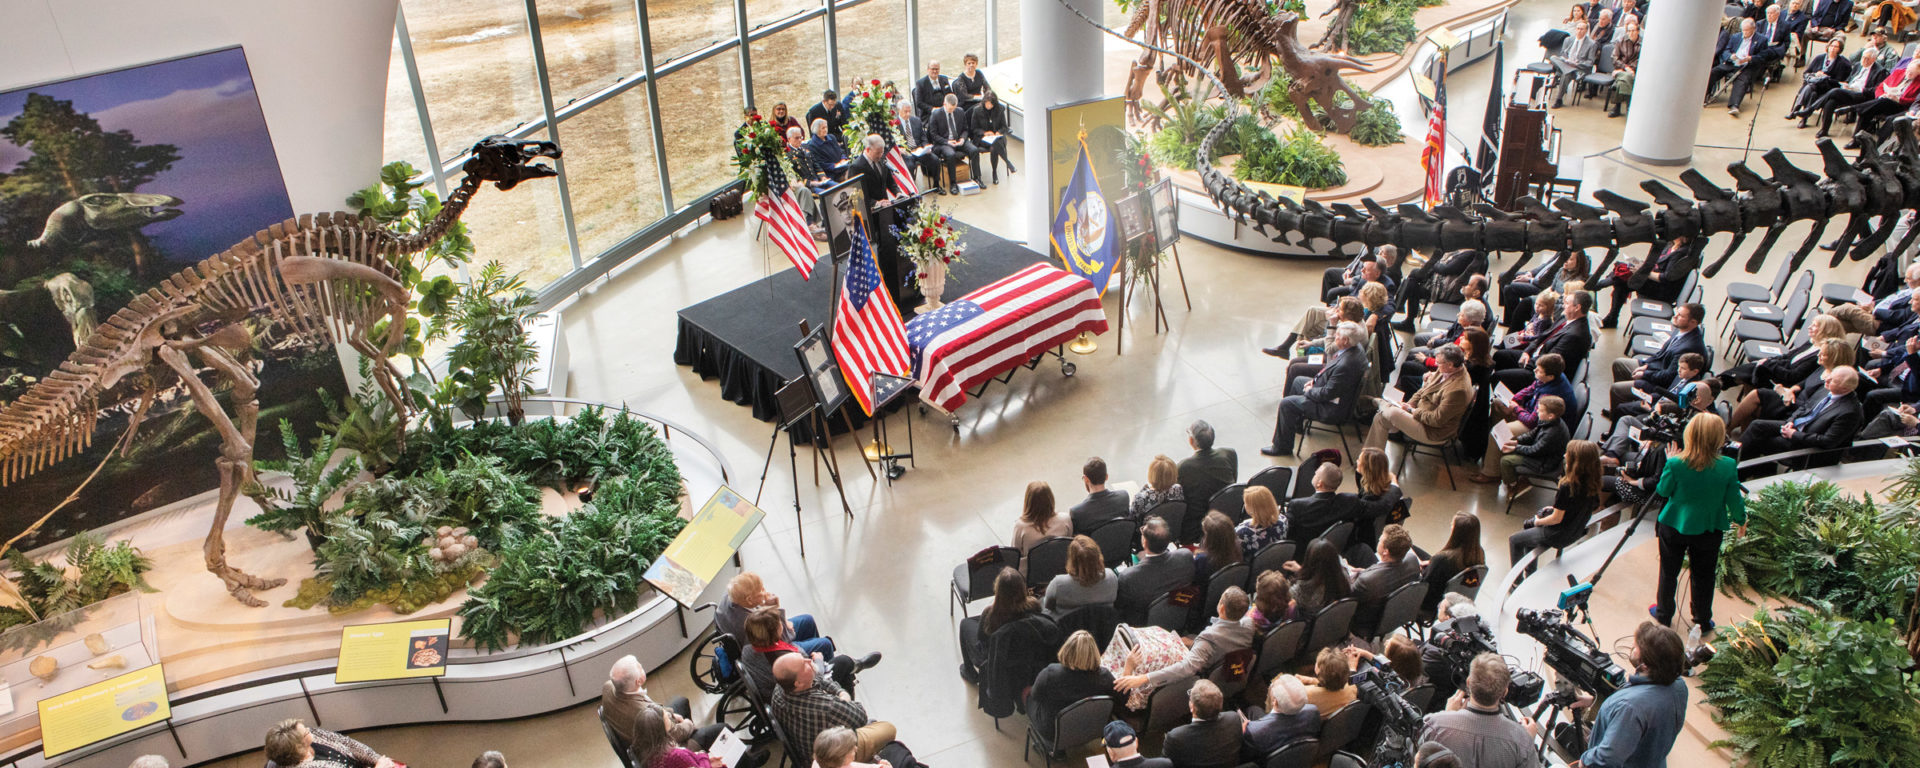 Mourners attending Lt. Richard “Tito” Lannom’s memorial service at Discovery Park of America filled all three floors of the museum.